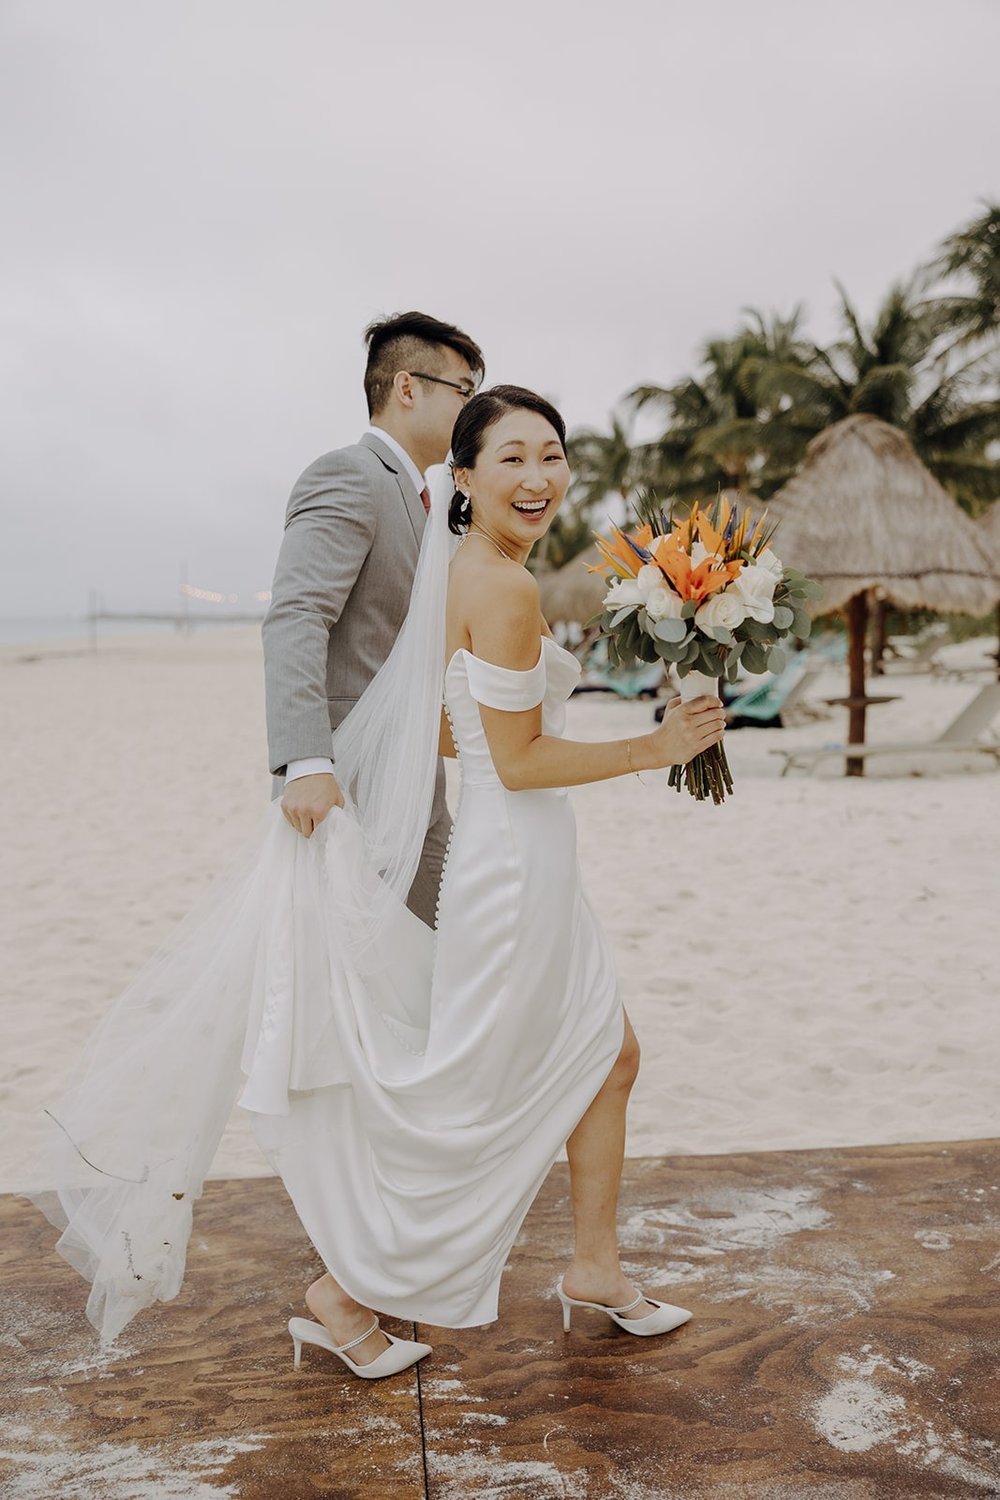 Bride and groom exit their Cancun resort wedding ceremony on the beach